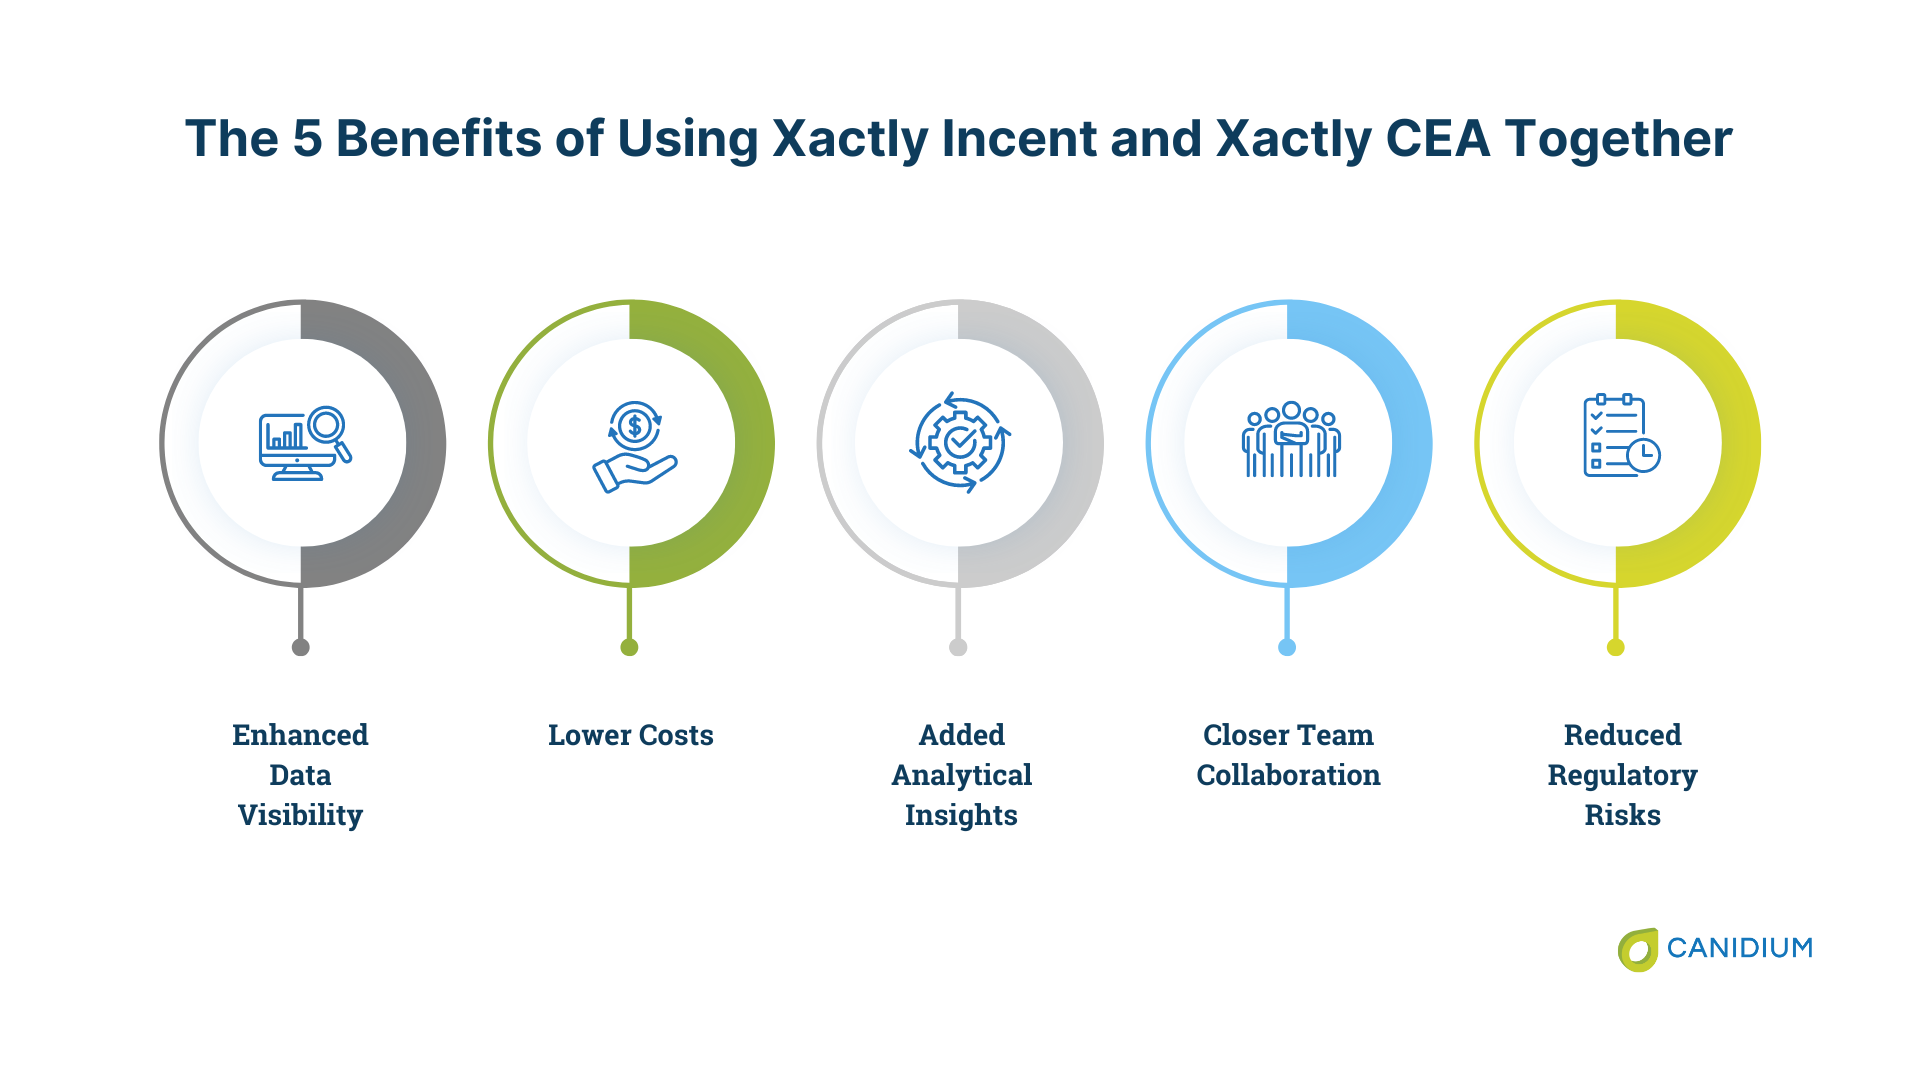 The 5 benefits of using Xactly Incent and Xactly CEA together